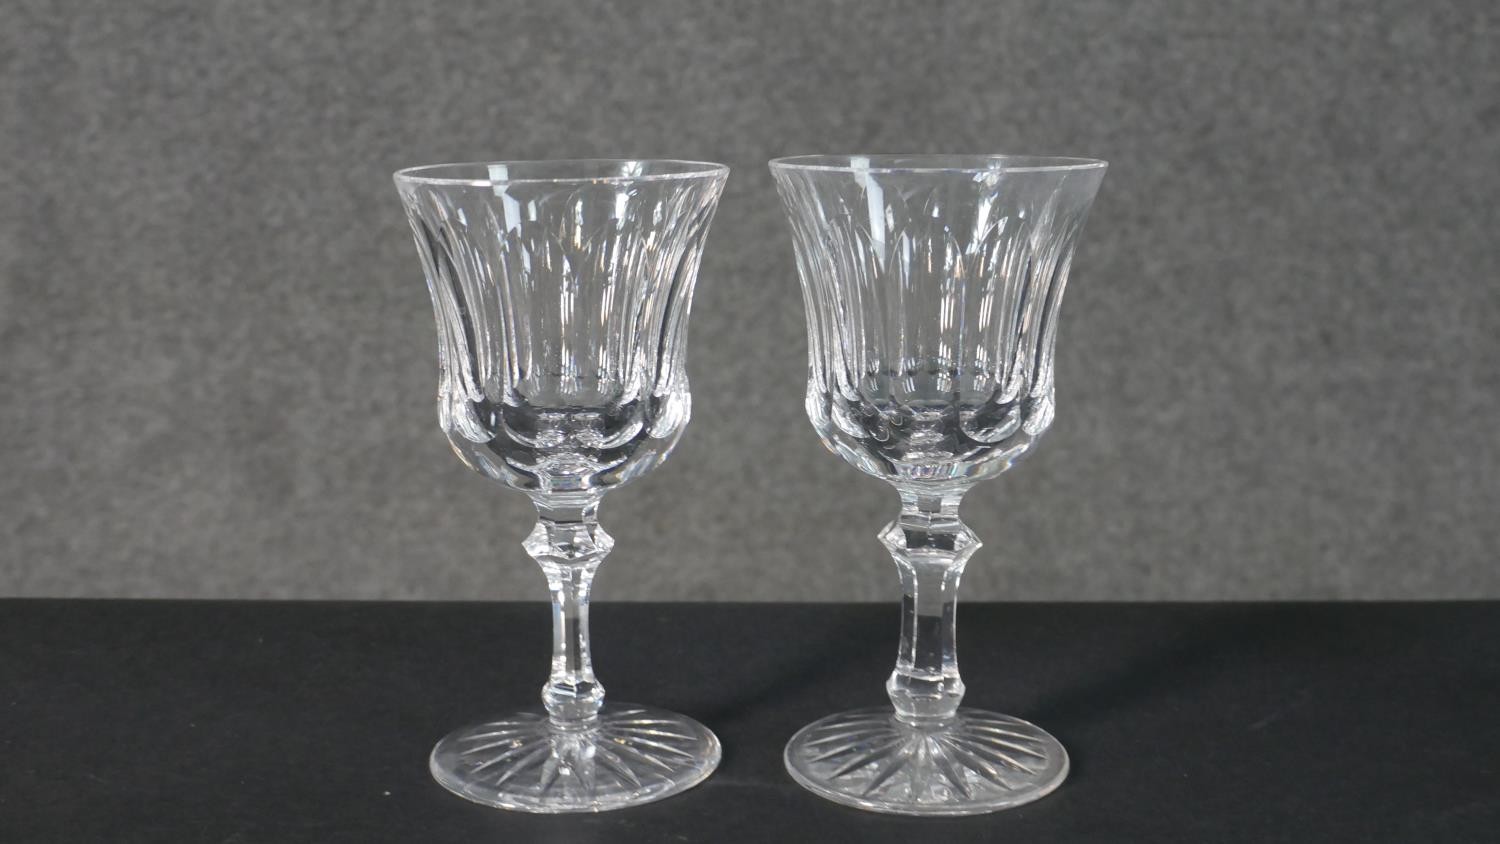 A collection of seven hand cut Waterford crystal wine and sherry glasses with star cut bases. - Image 4 of 6